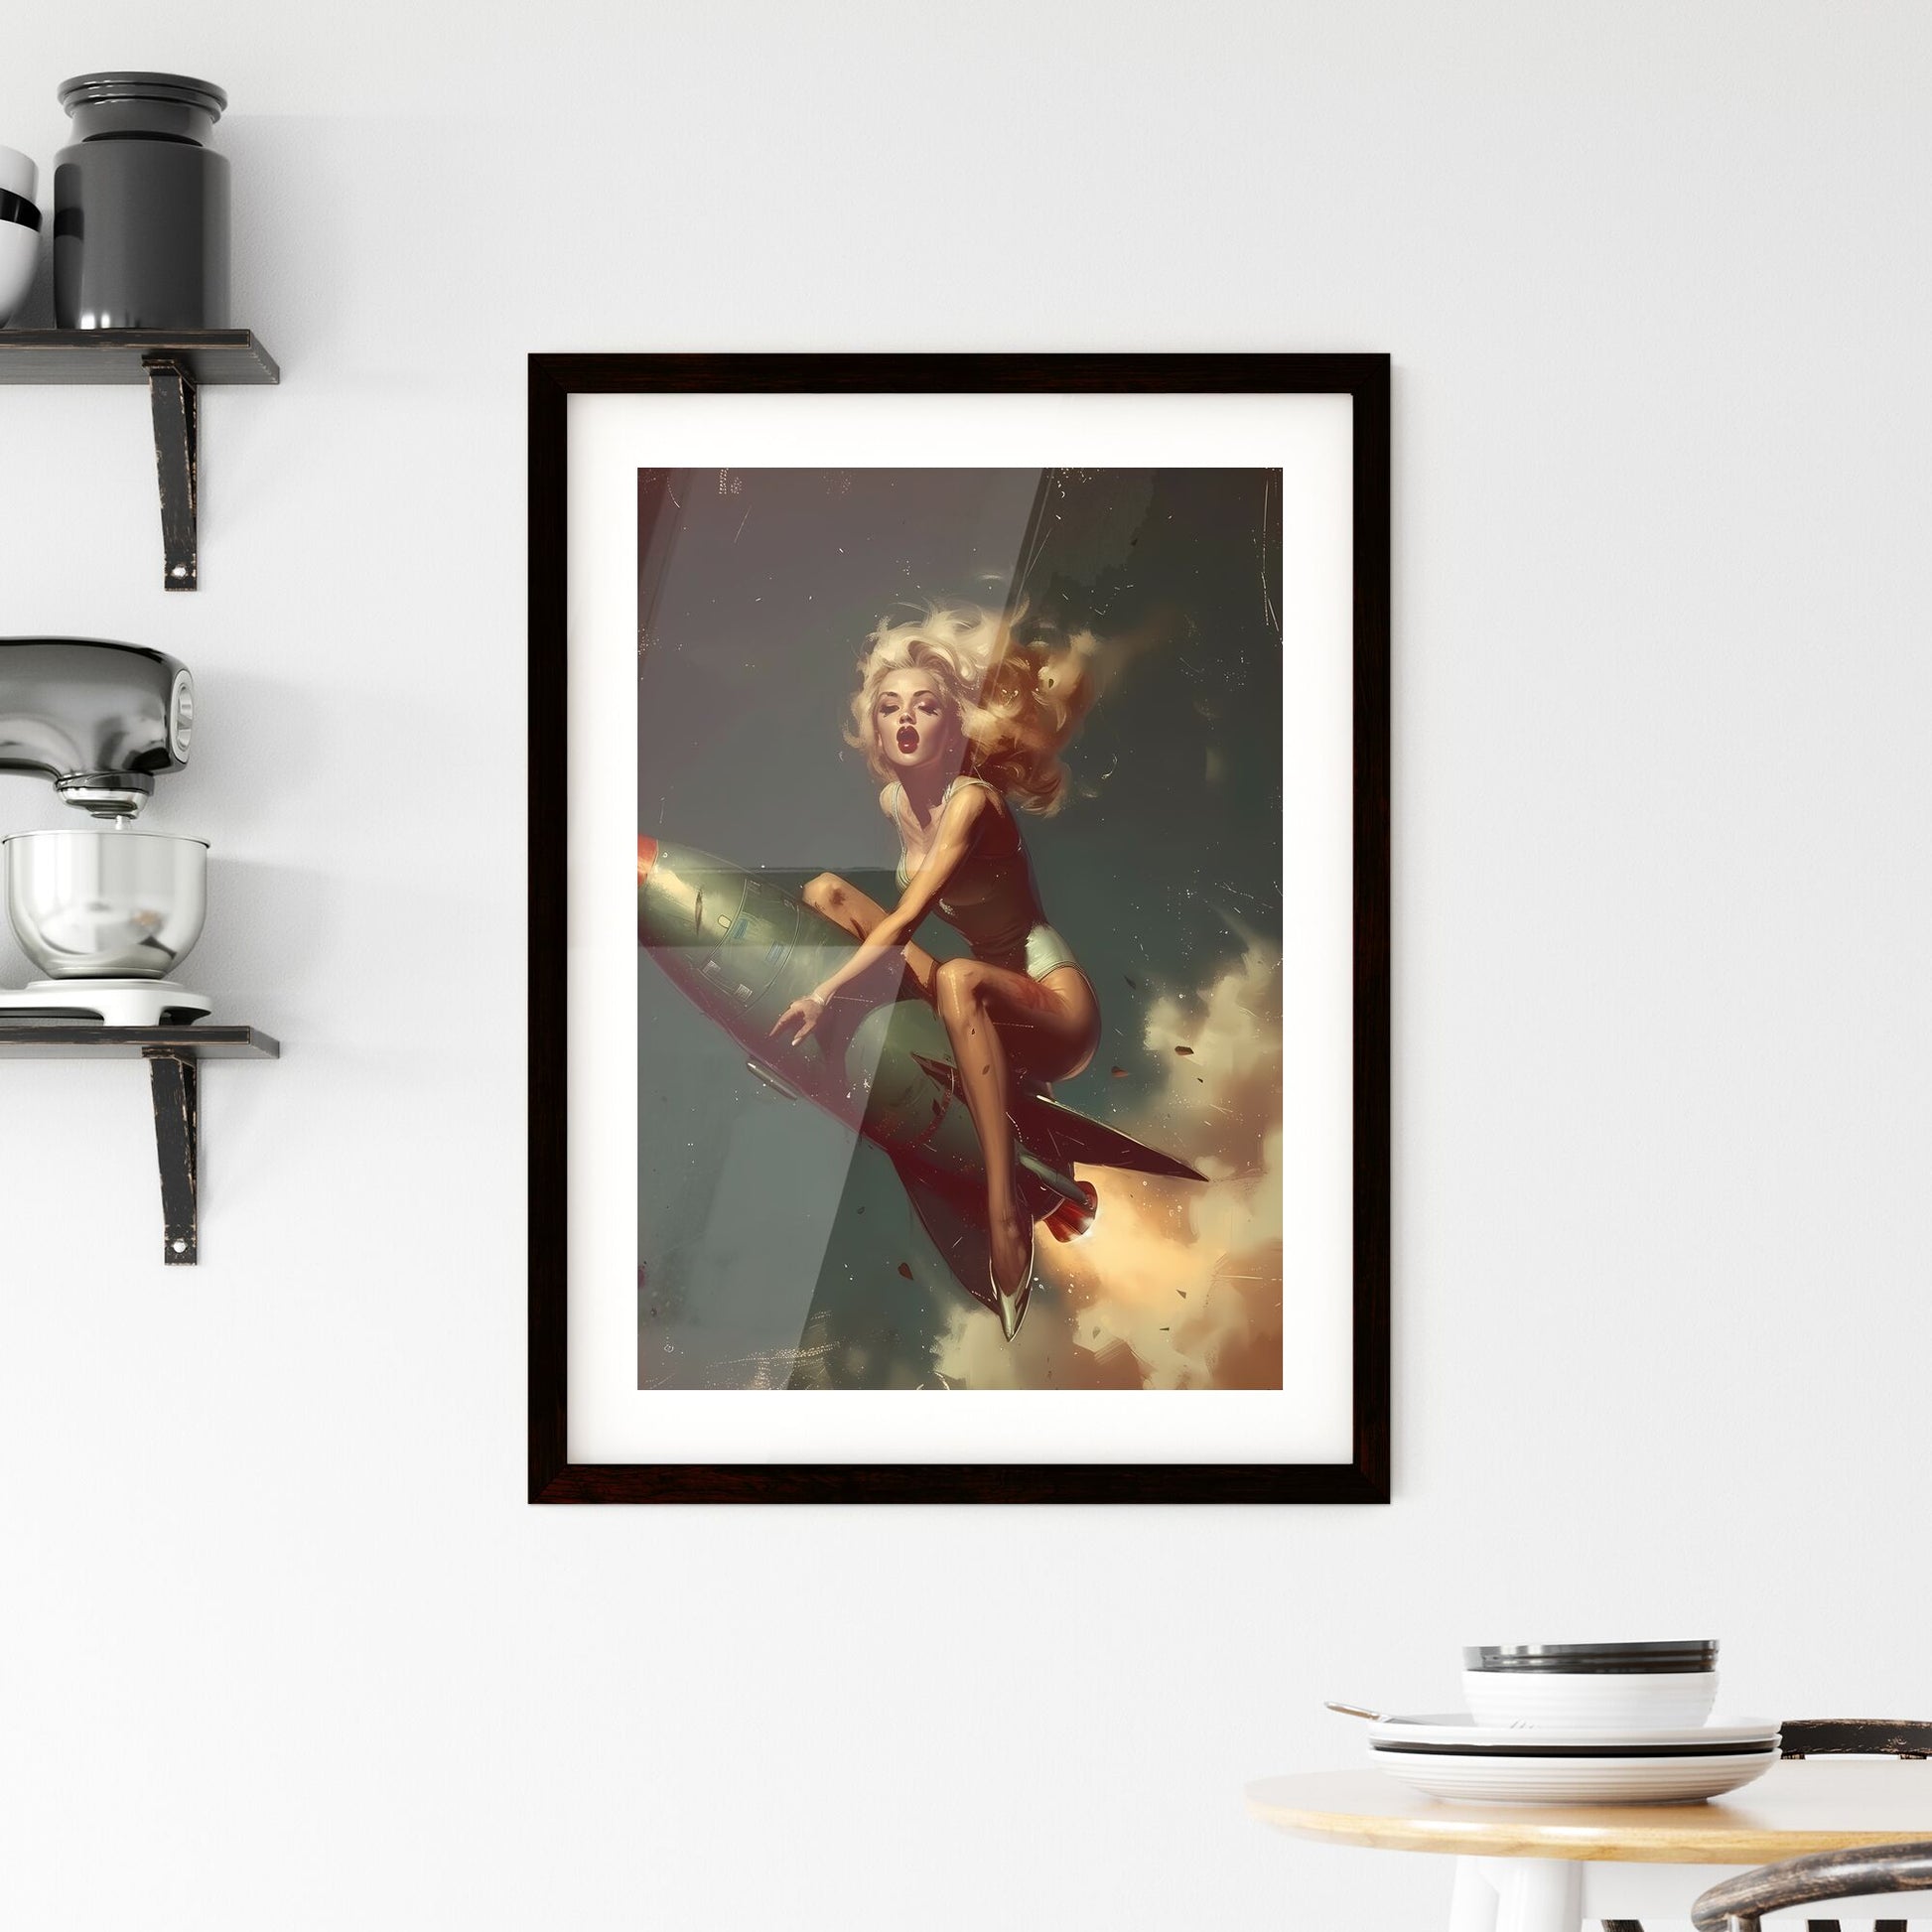 The head nurse sharply directed the nurses riding a rocket - Art print of a woman in garment sitting on a rocket Default Title